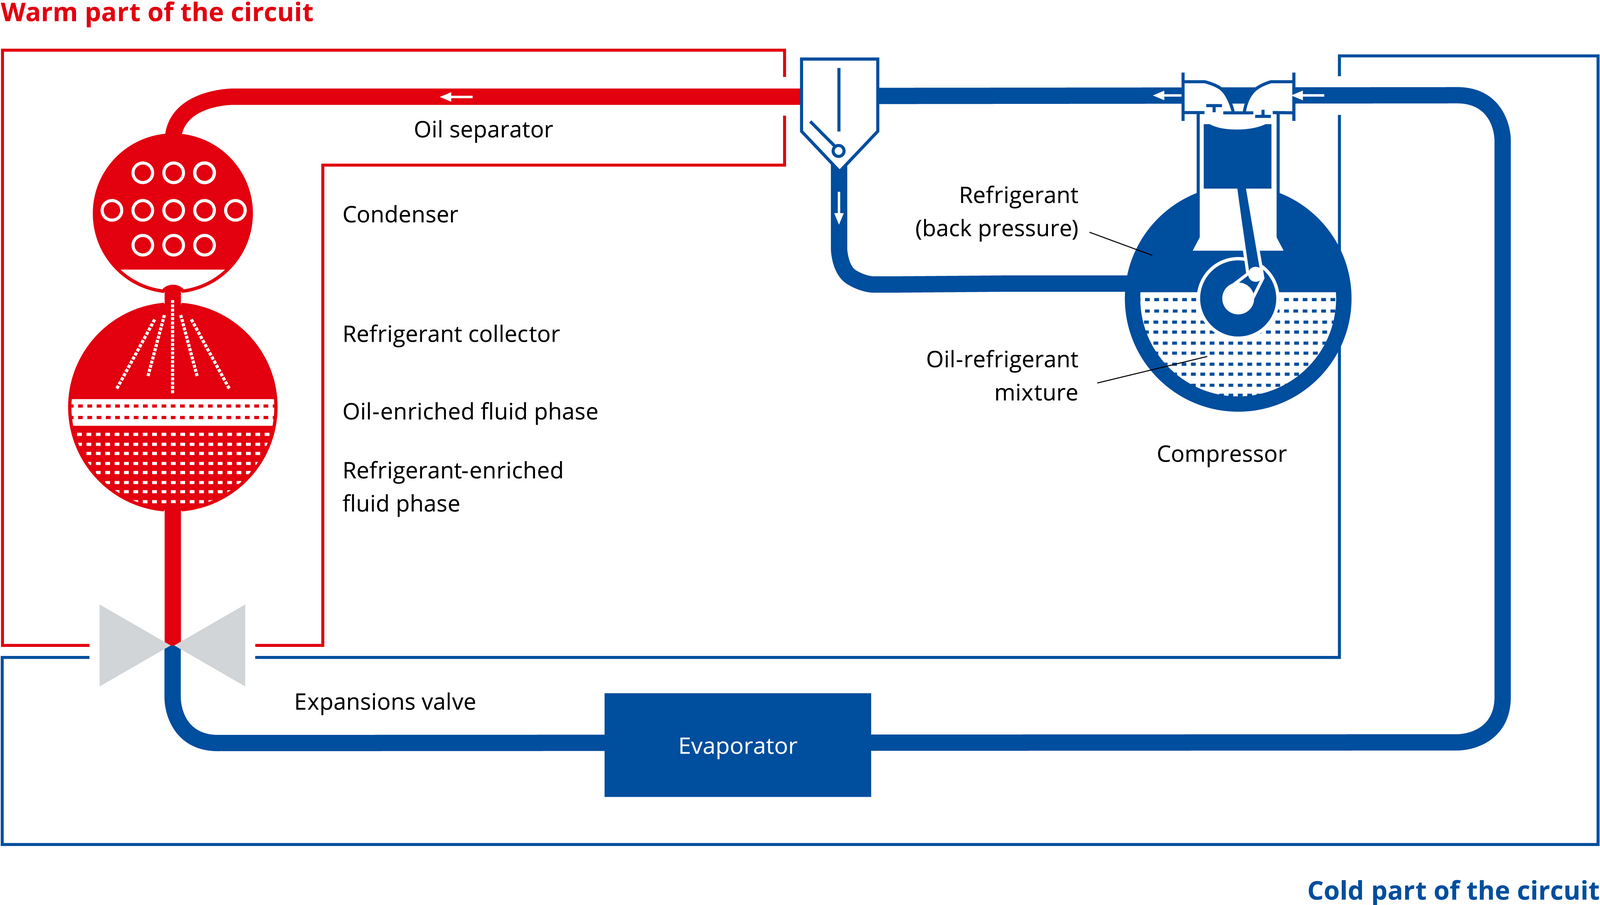 The figure shows the refrigeration oil in the compressor and the remaining components from the refrigerant circuit.